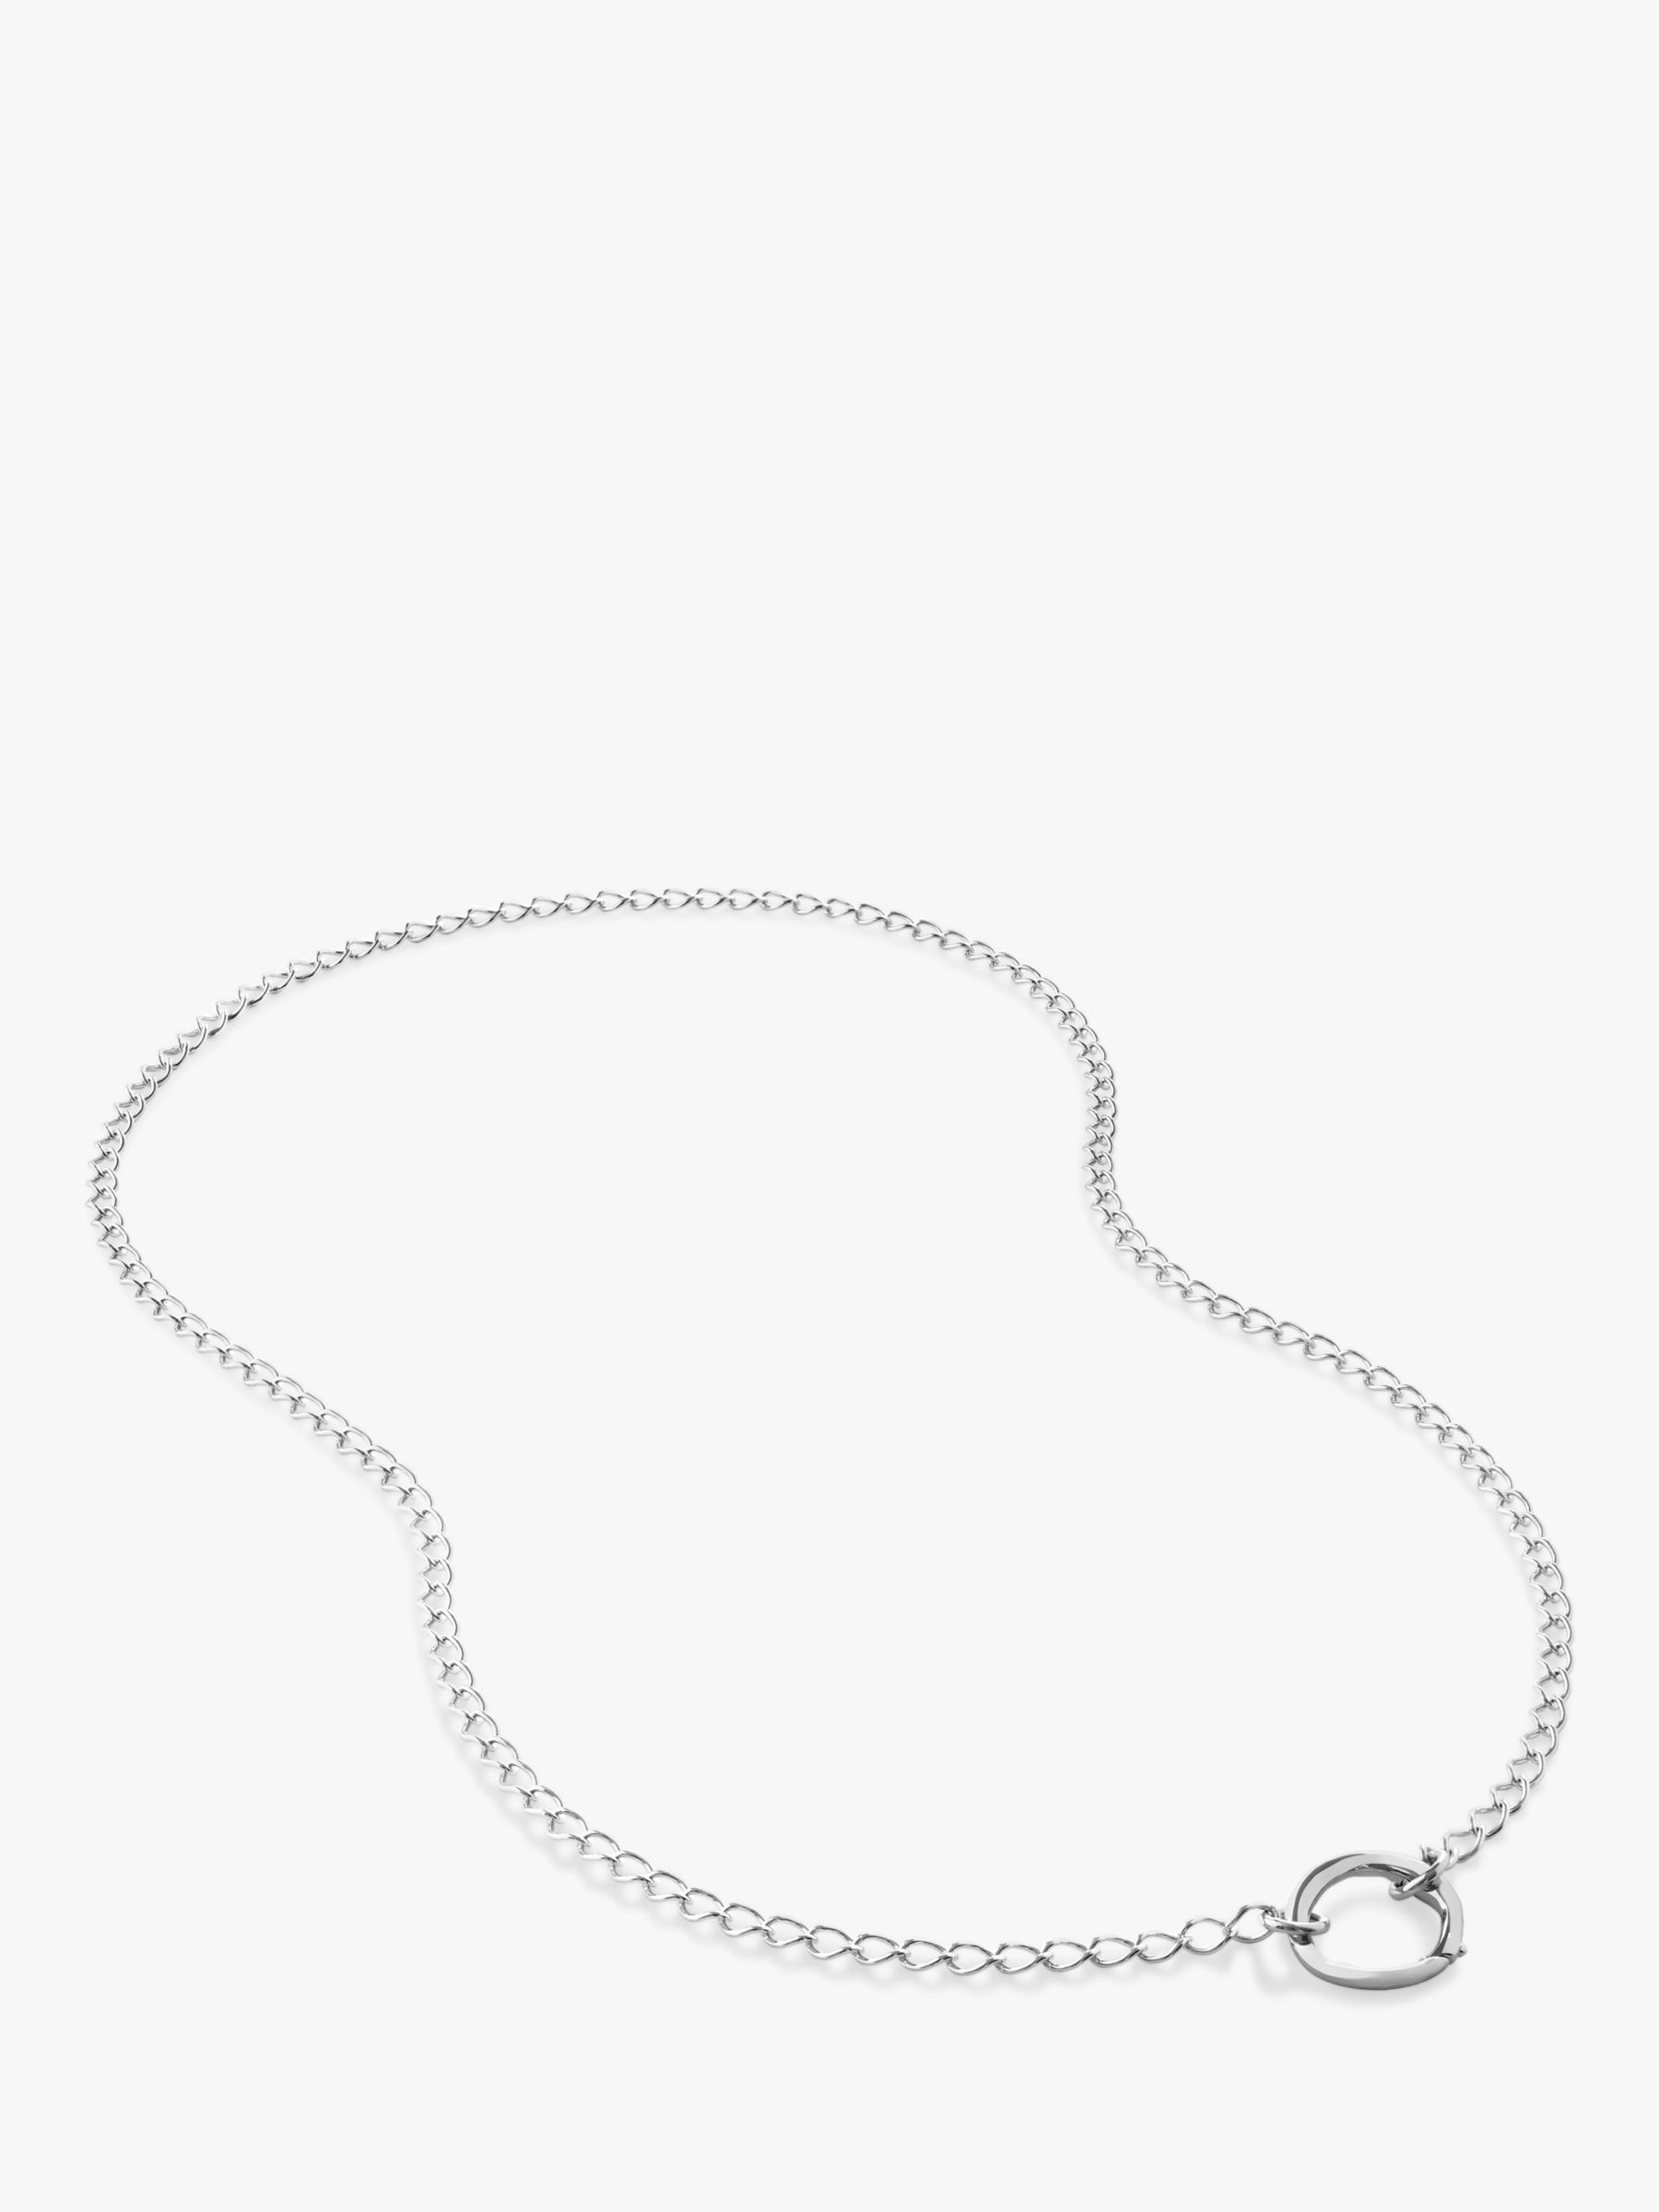 Monica Vinader Capture Chain Necklace, Silver at John Lewis & Partners